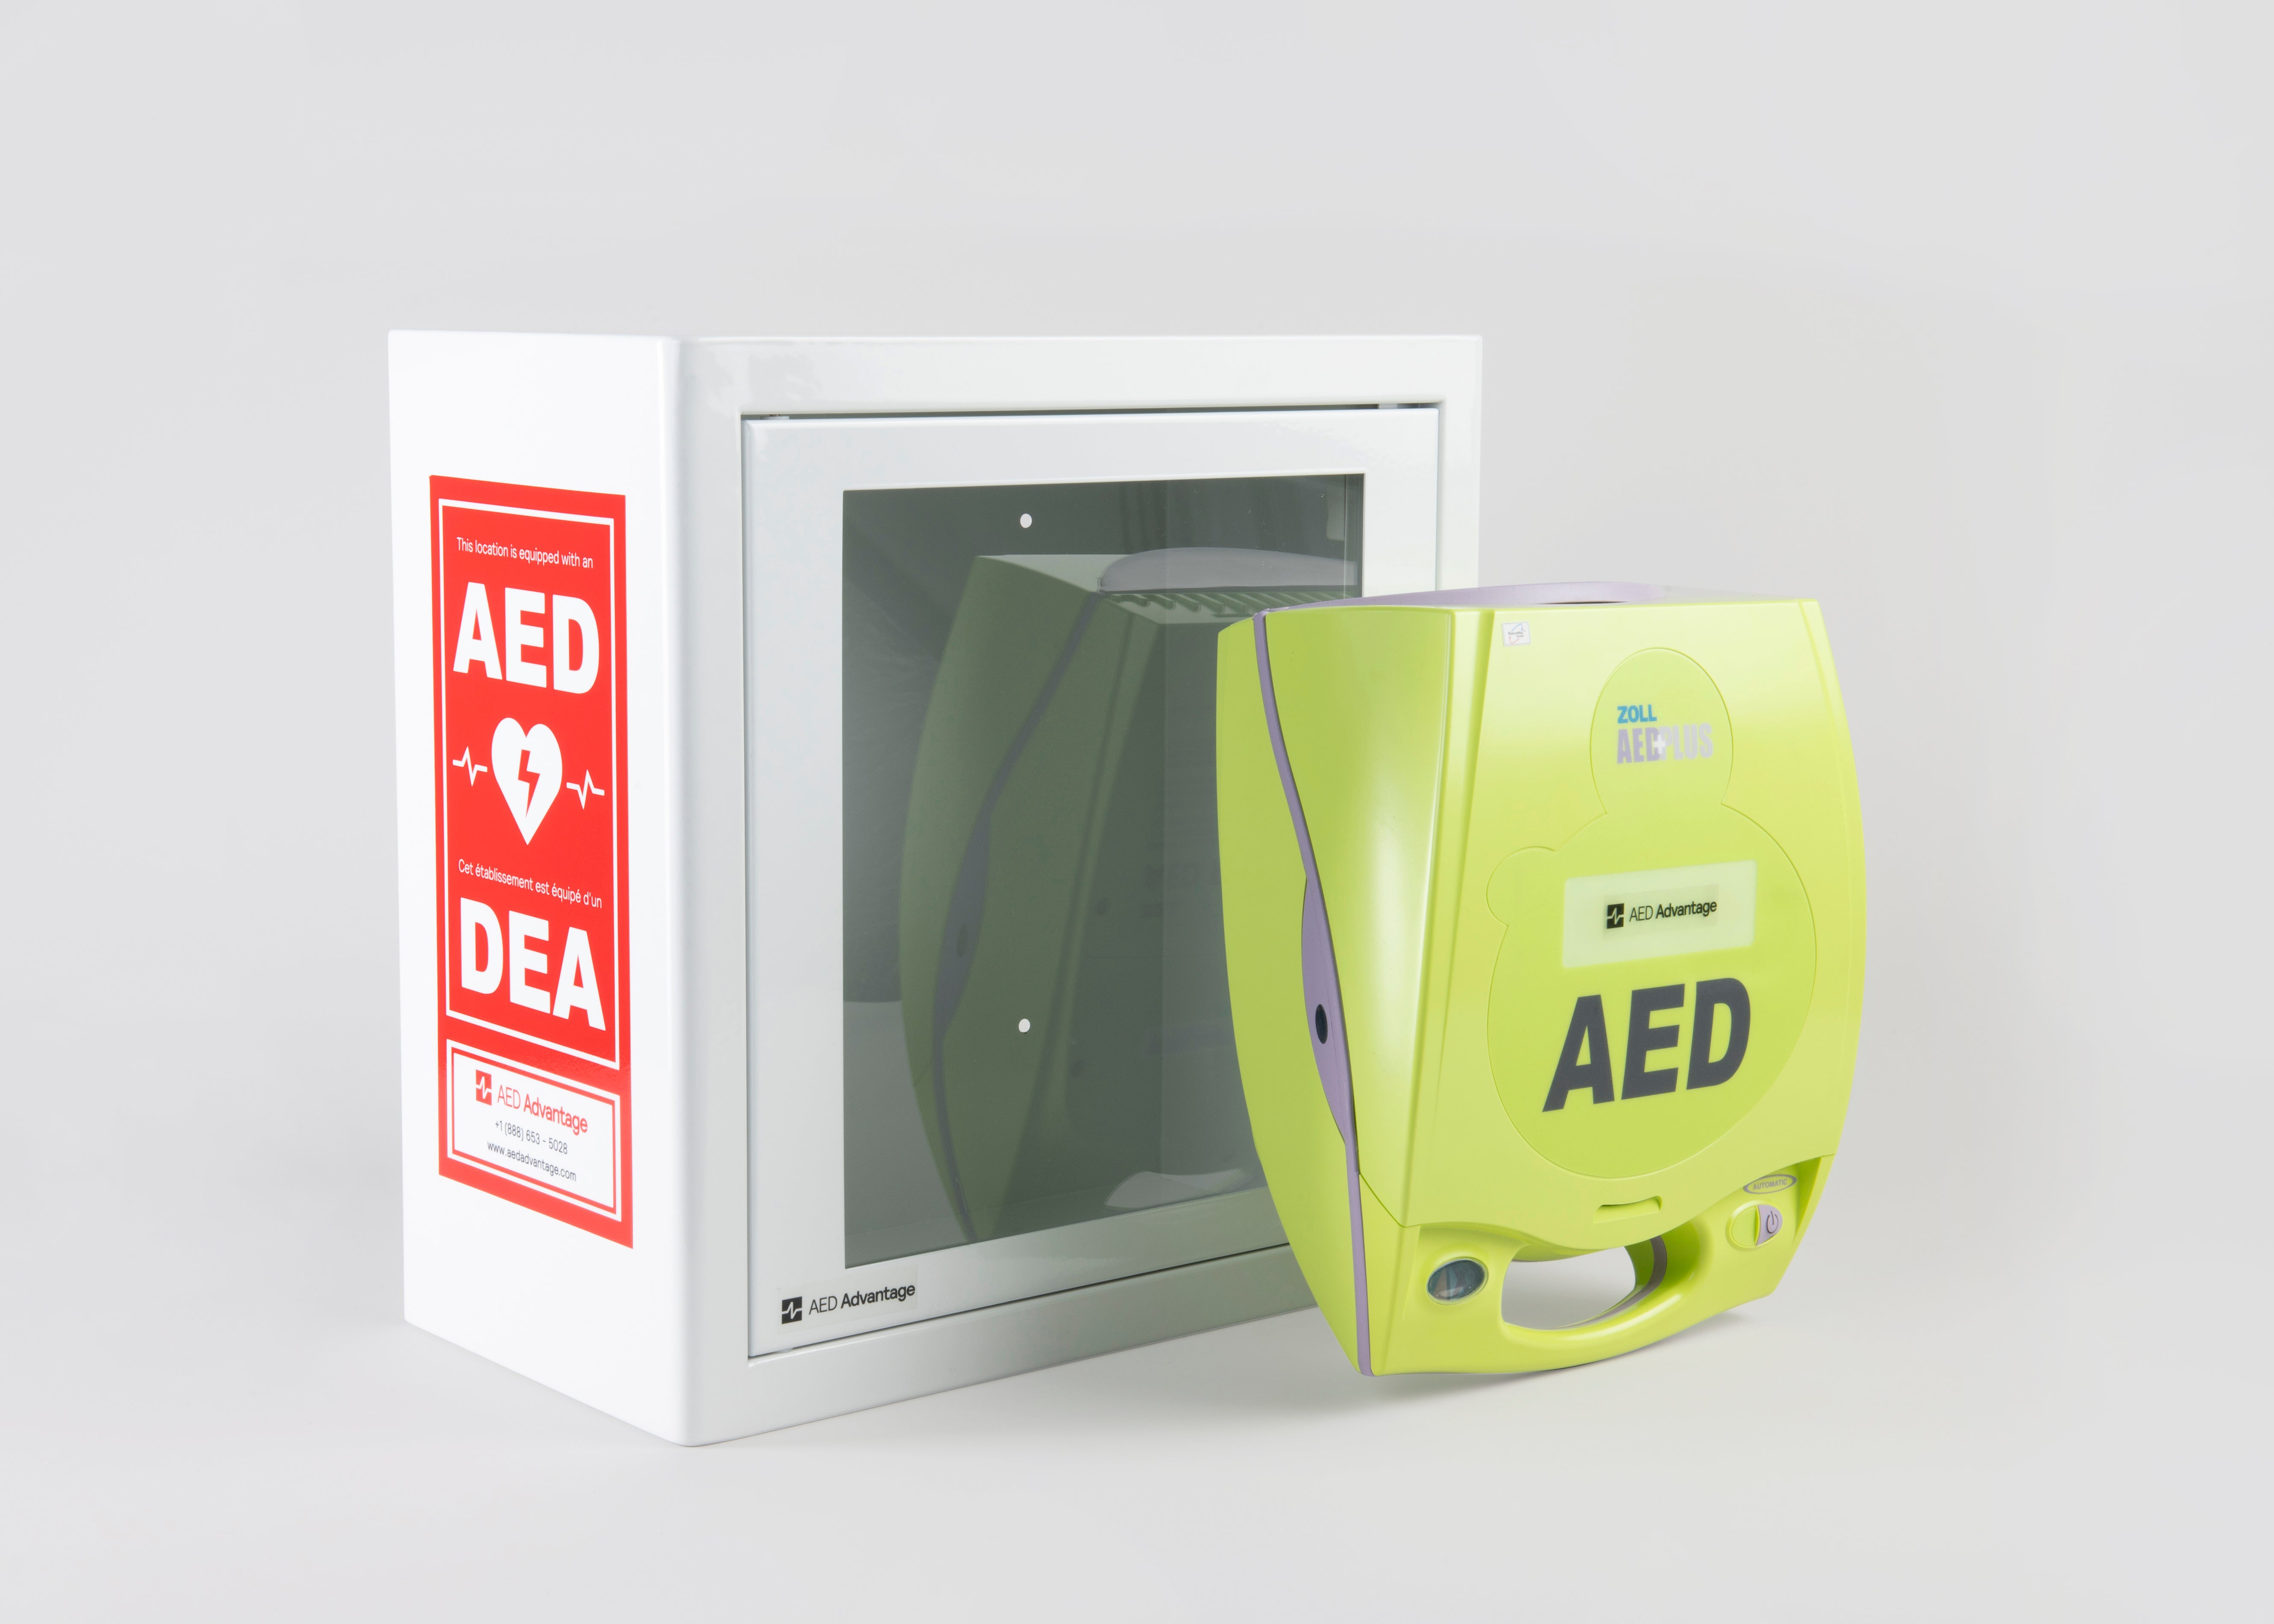 A green ZOLL AED Plus machine standing in front of a white metal cabinet with red decals